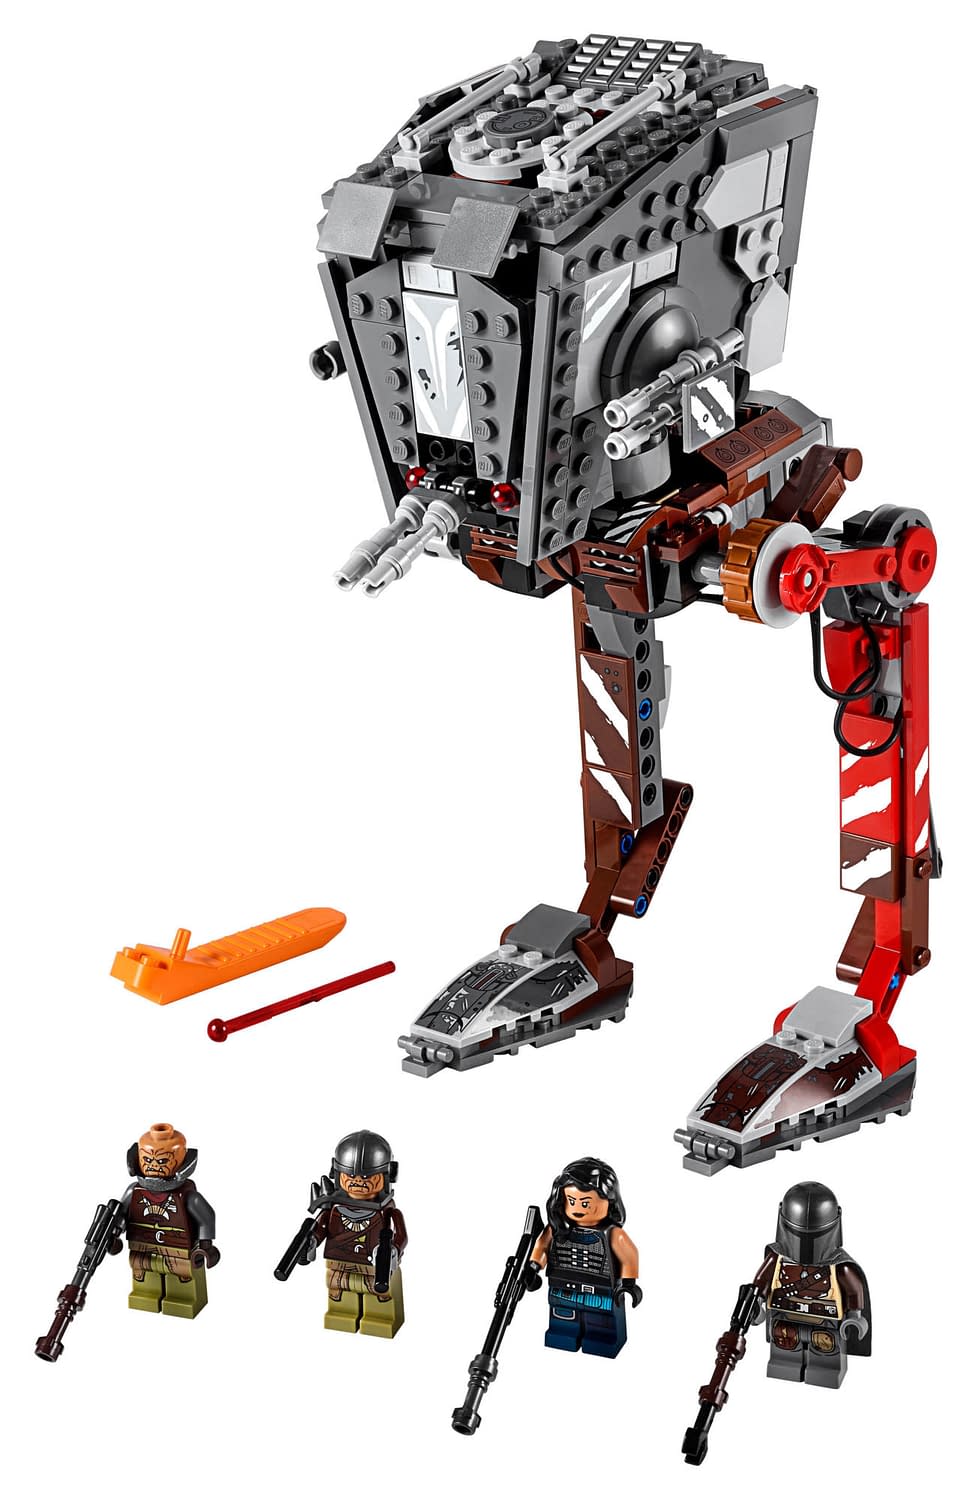 new lego star wars sets 2019 release dates